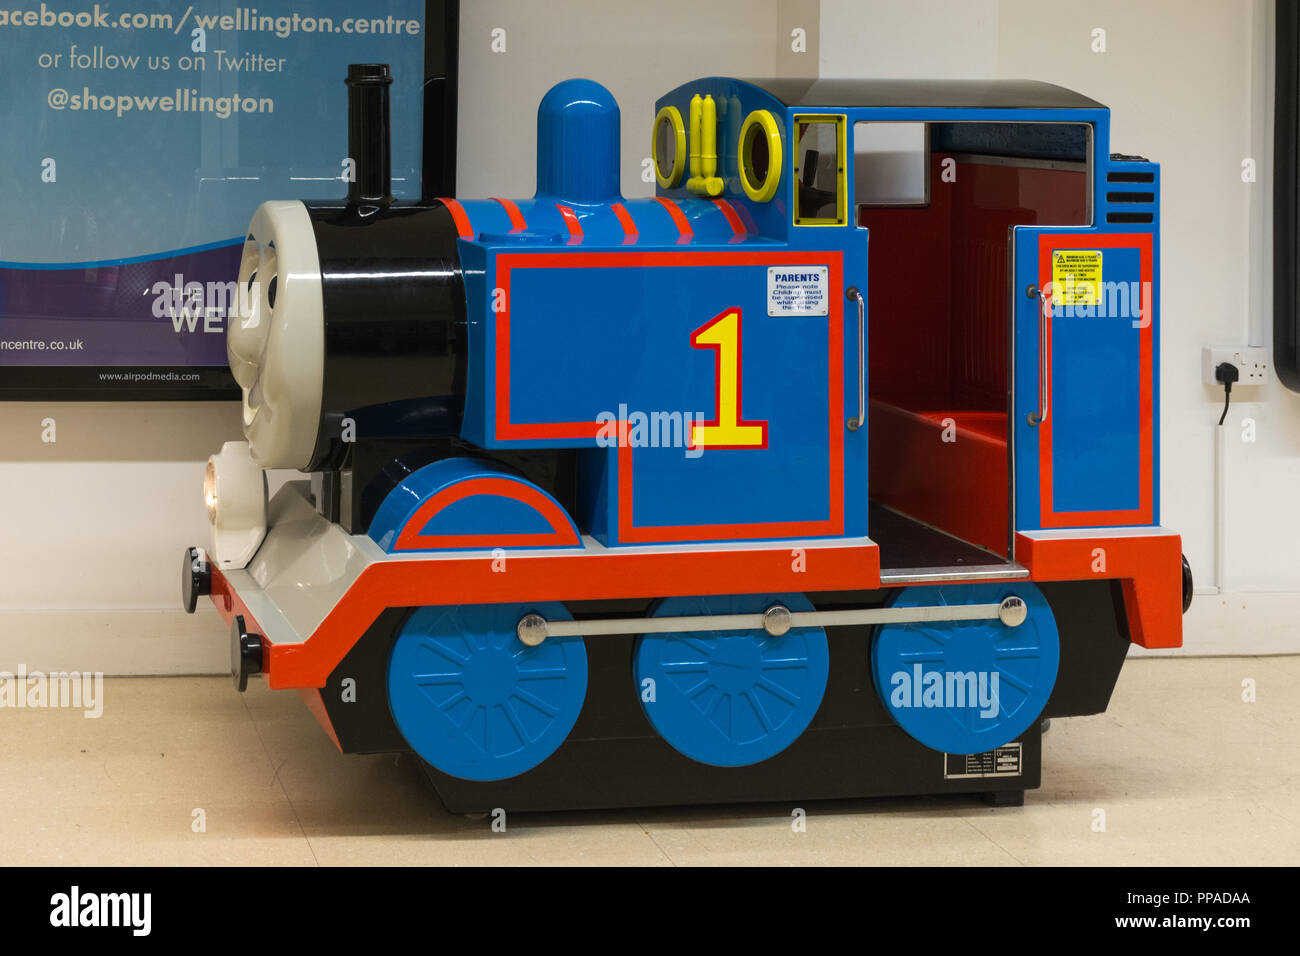 Child's coin operated Thomas the Tank Engine ride in an indoor shopping centre, UK Stock Photo